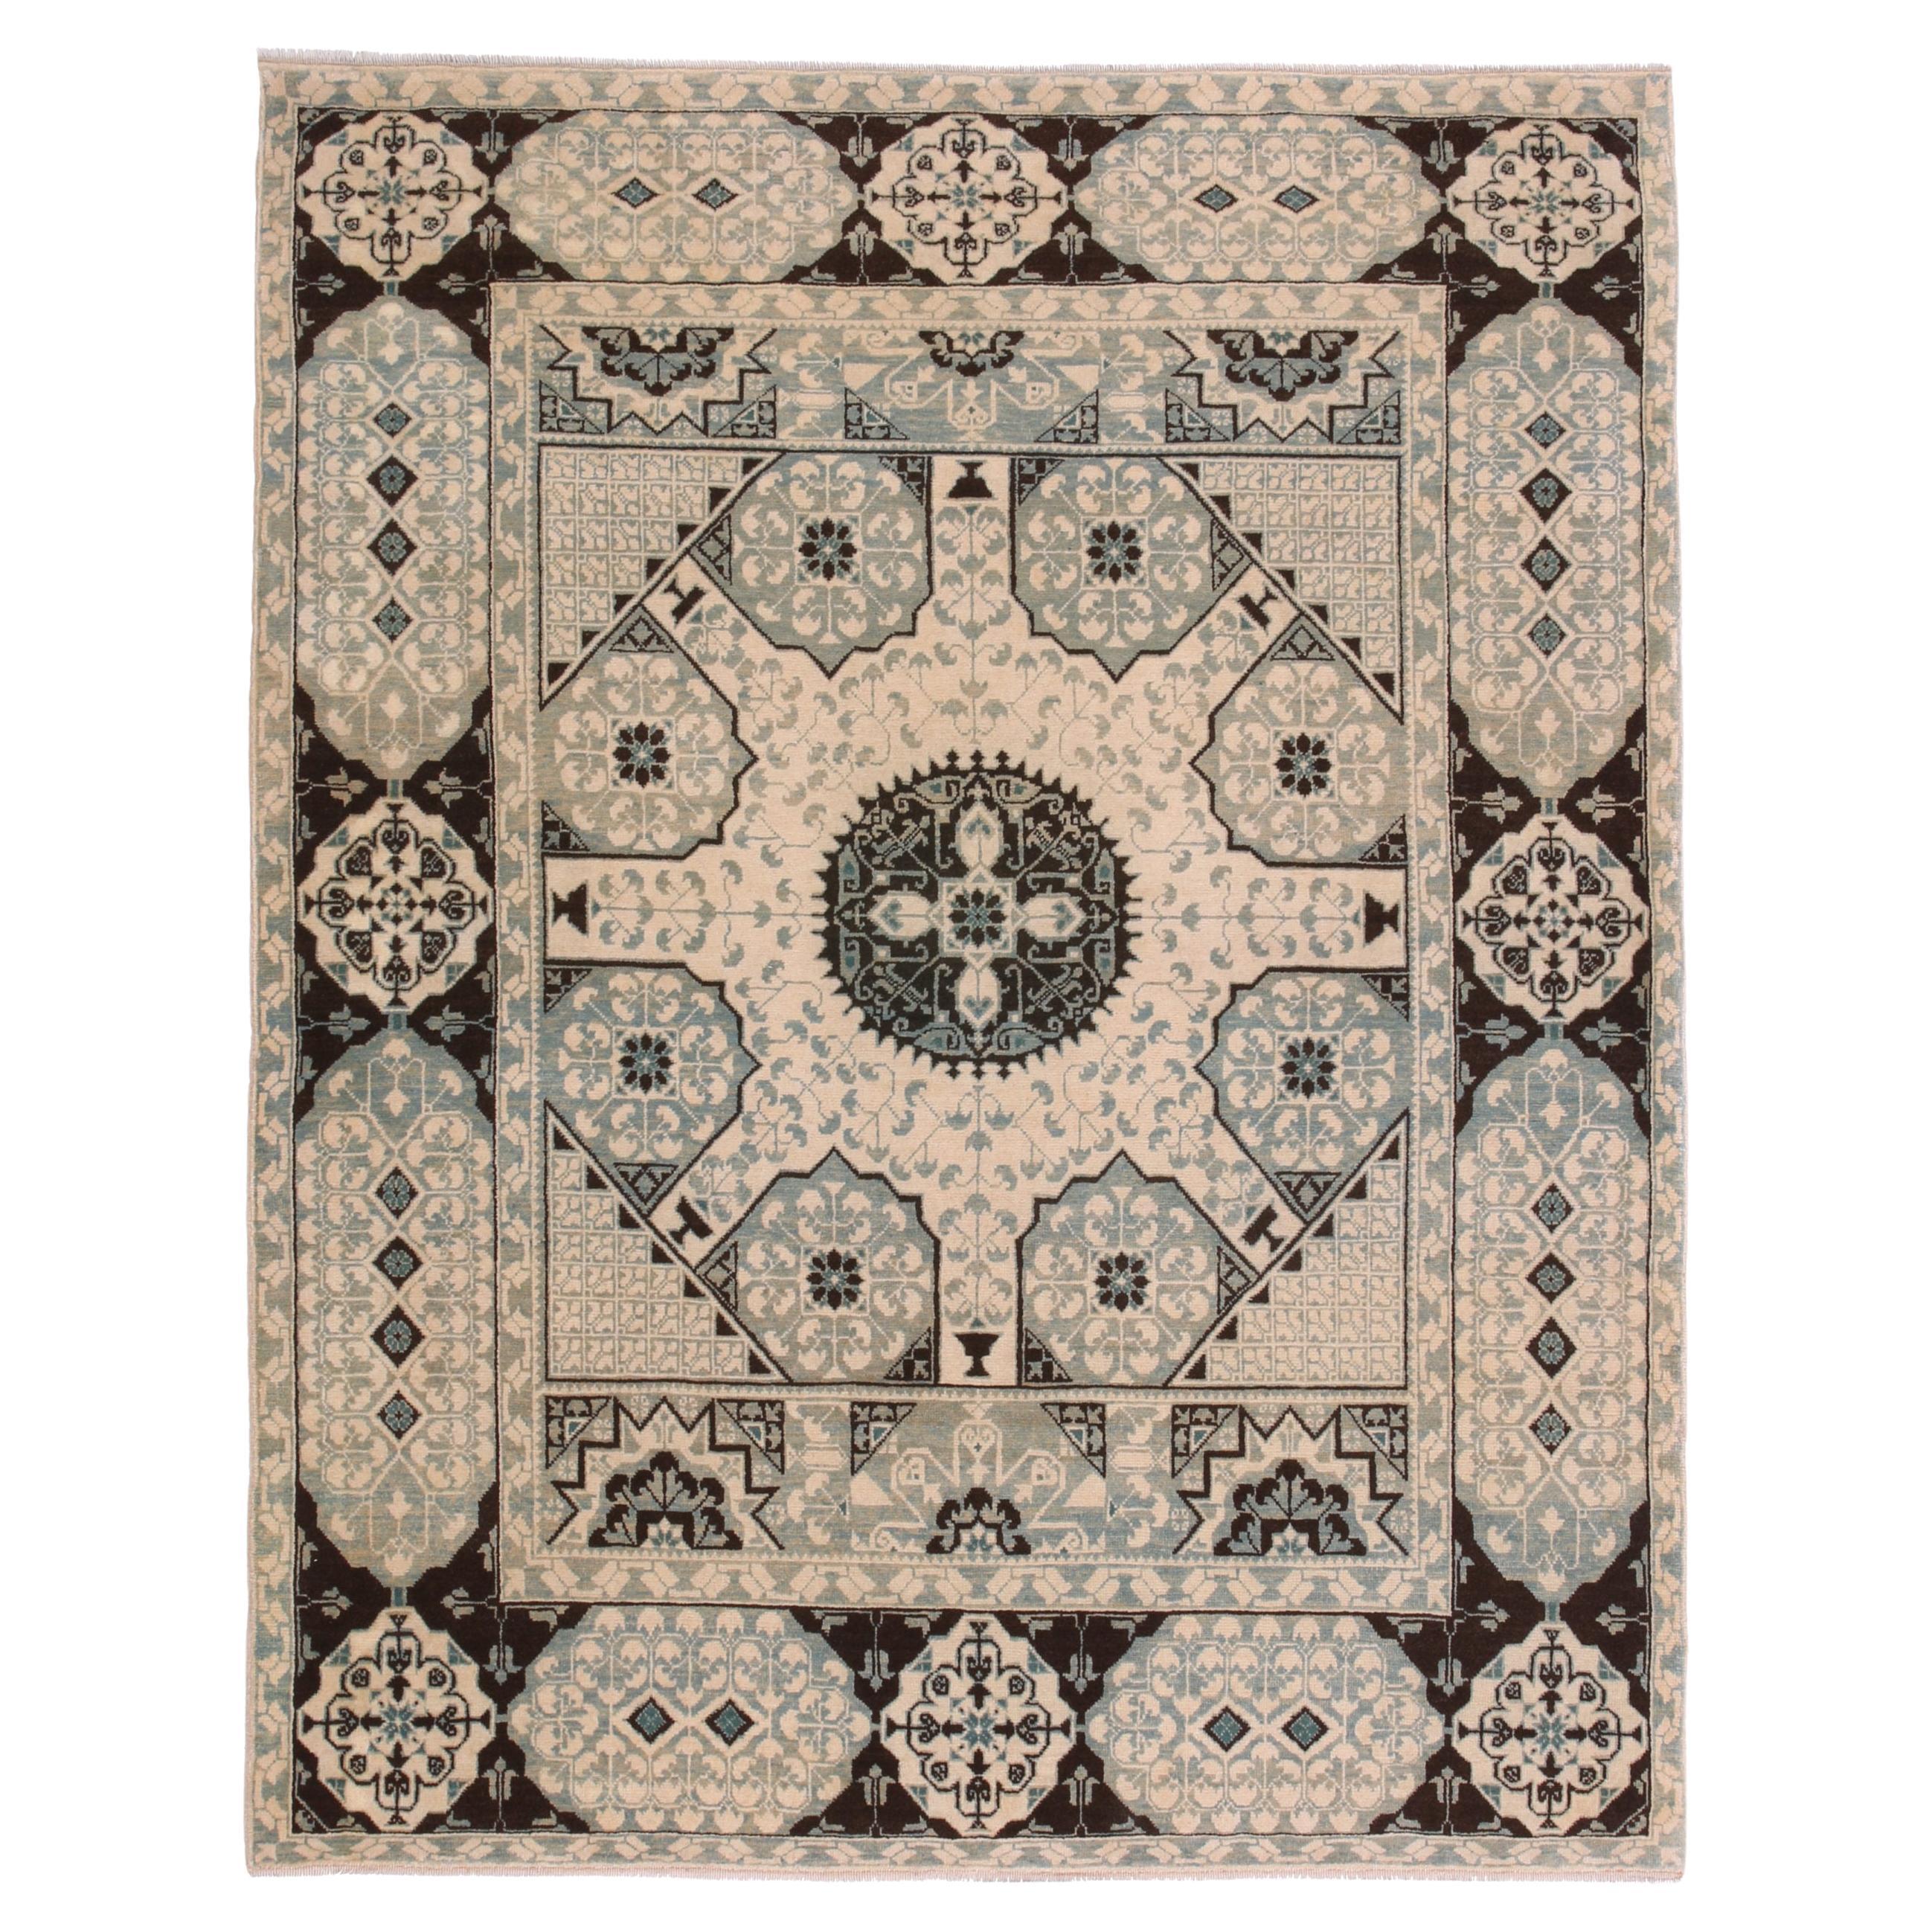 Ararat Rugs Mamluk Carpet with Cup Motif, Antique Revival Rug, Natural Dyed